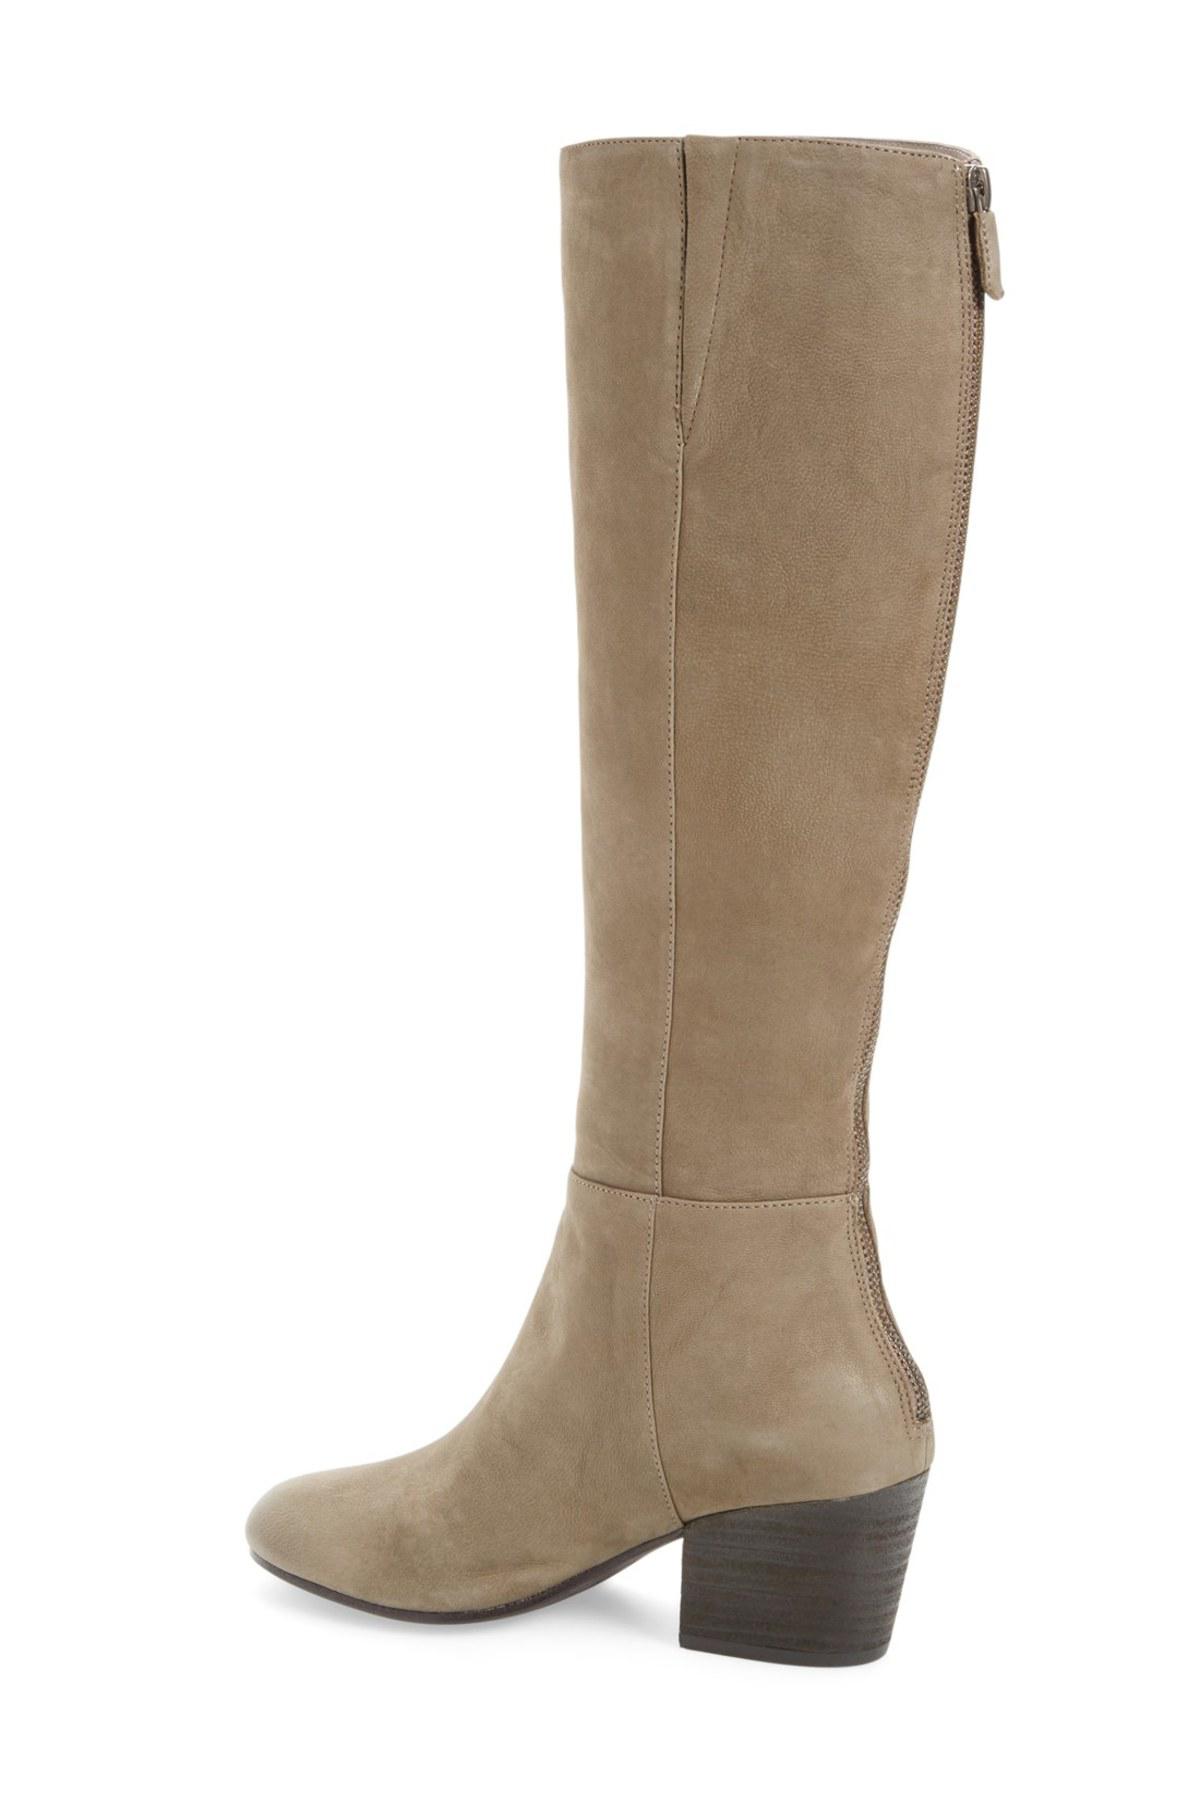 Eileen Fisher Leather Queen Tall Boot Lyst